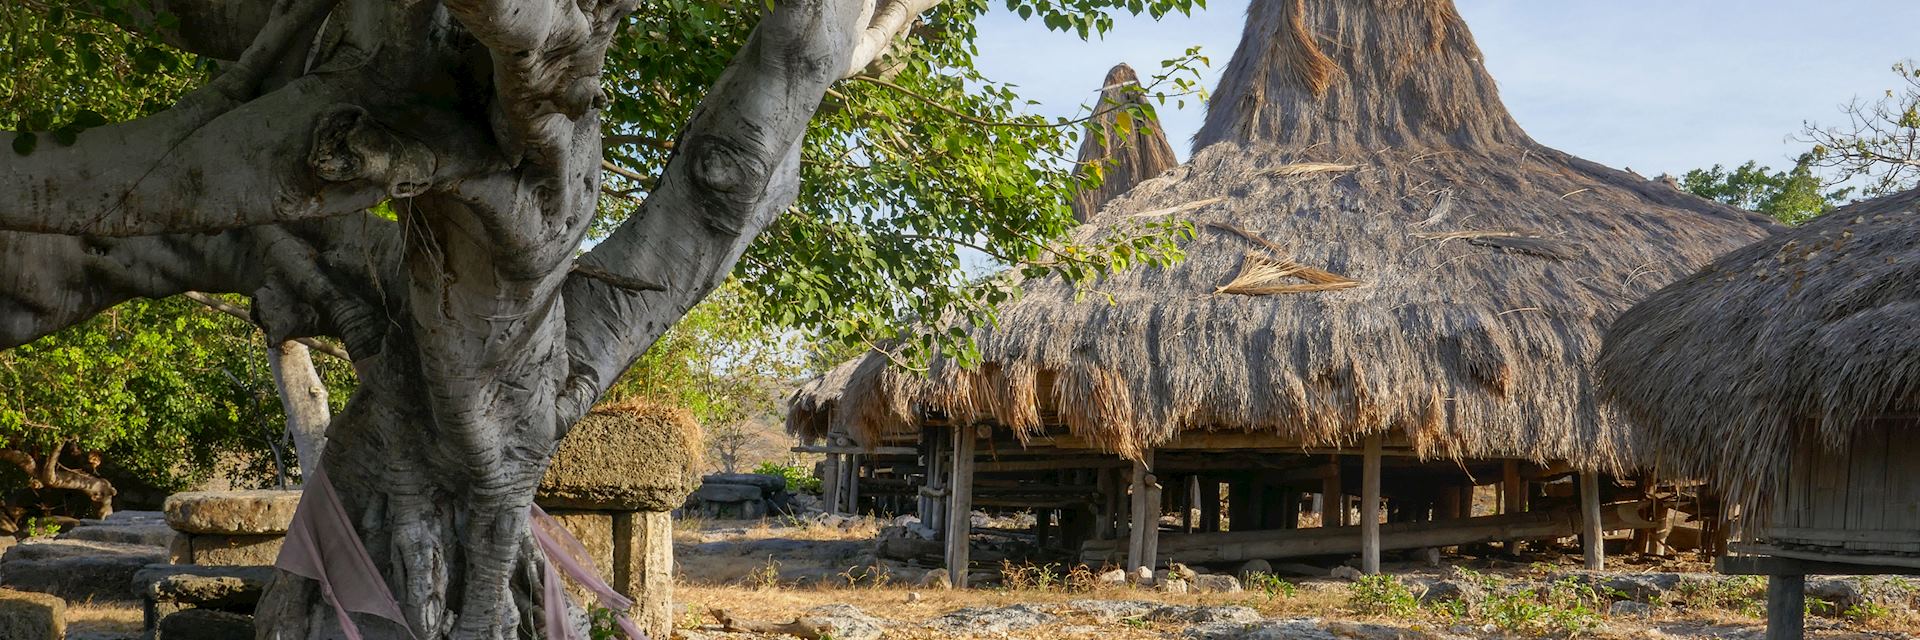 Traditional houses in Sumba